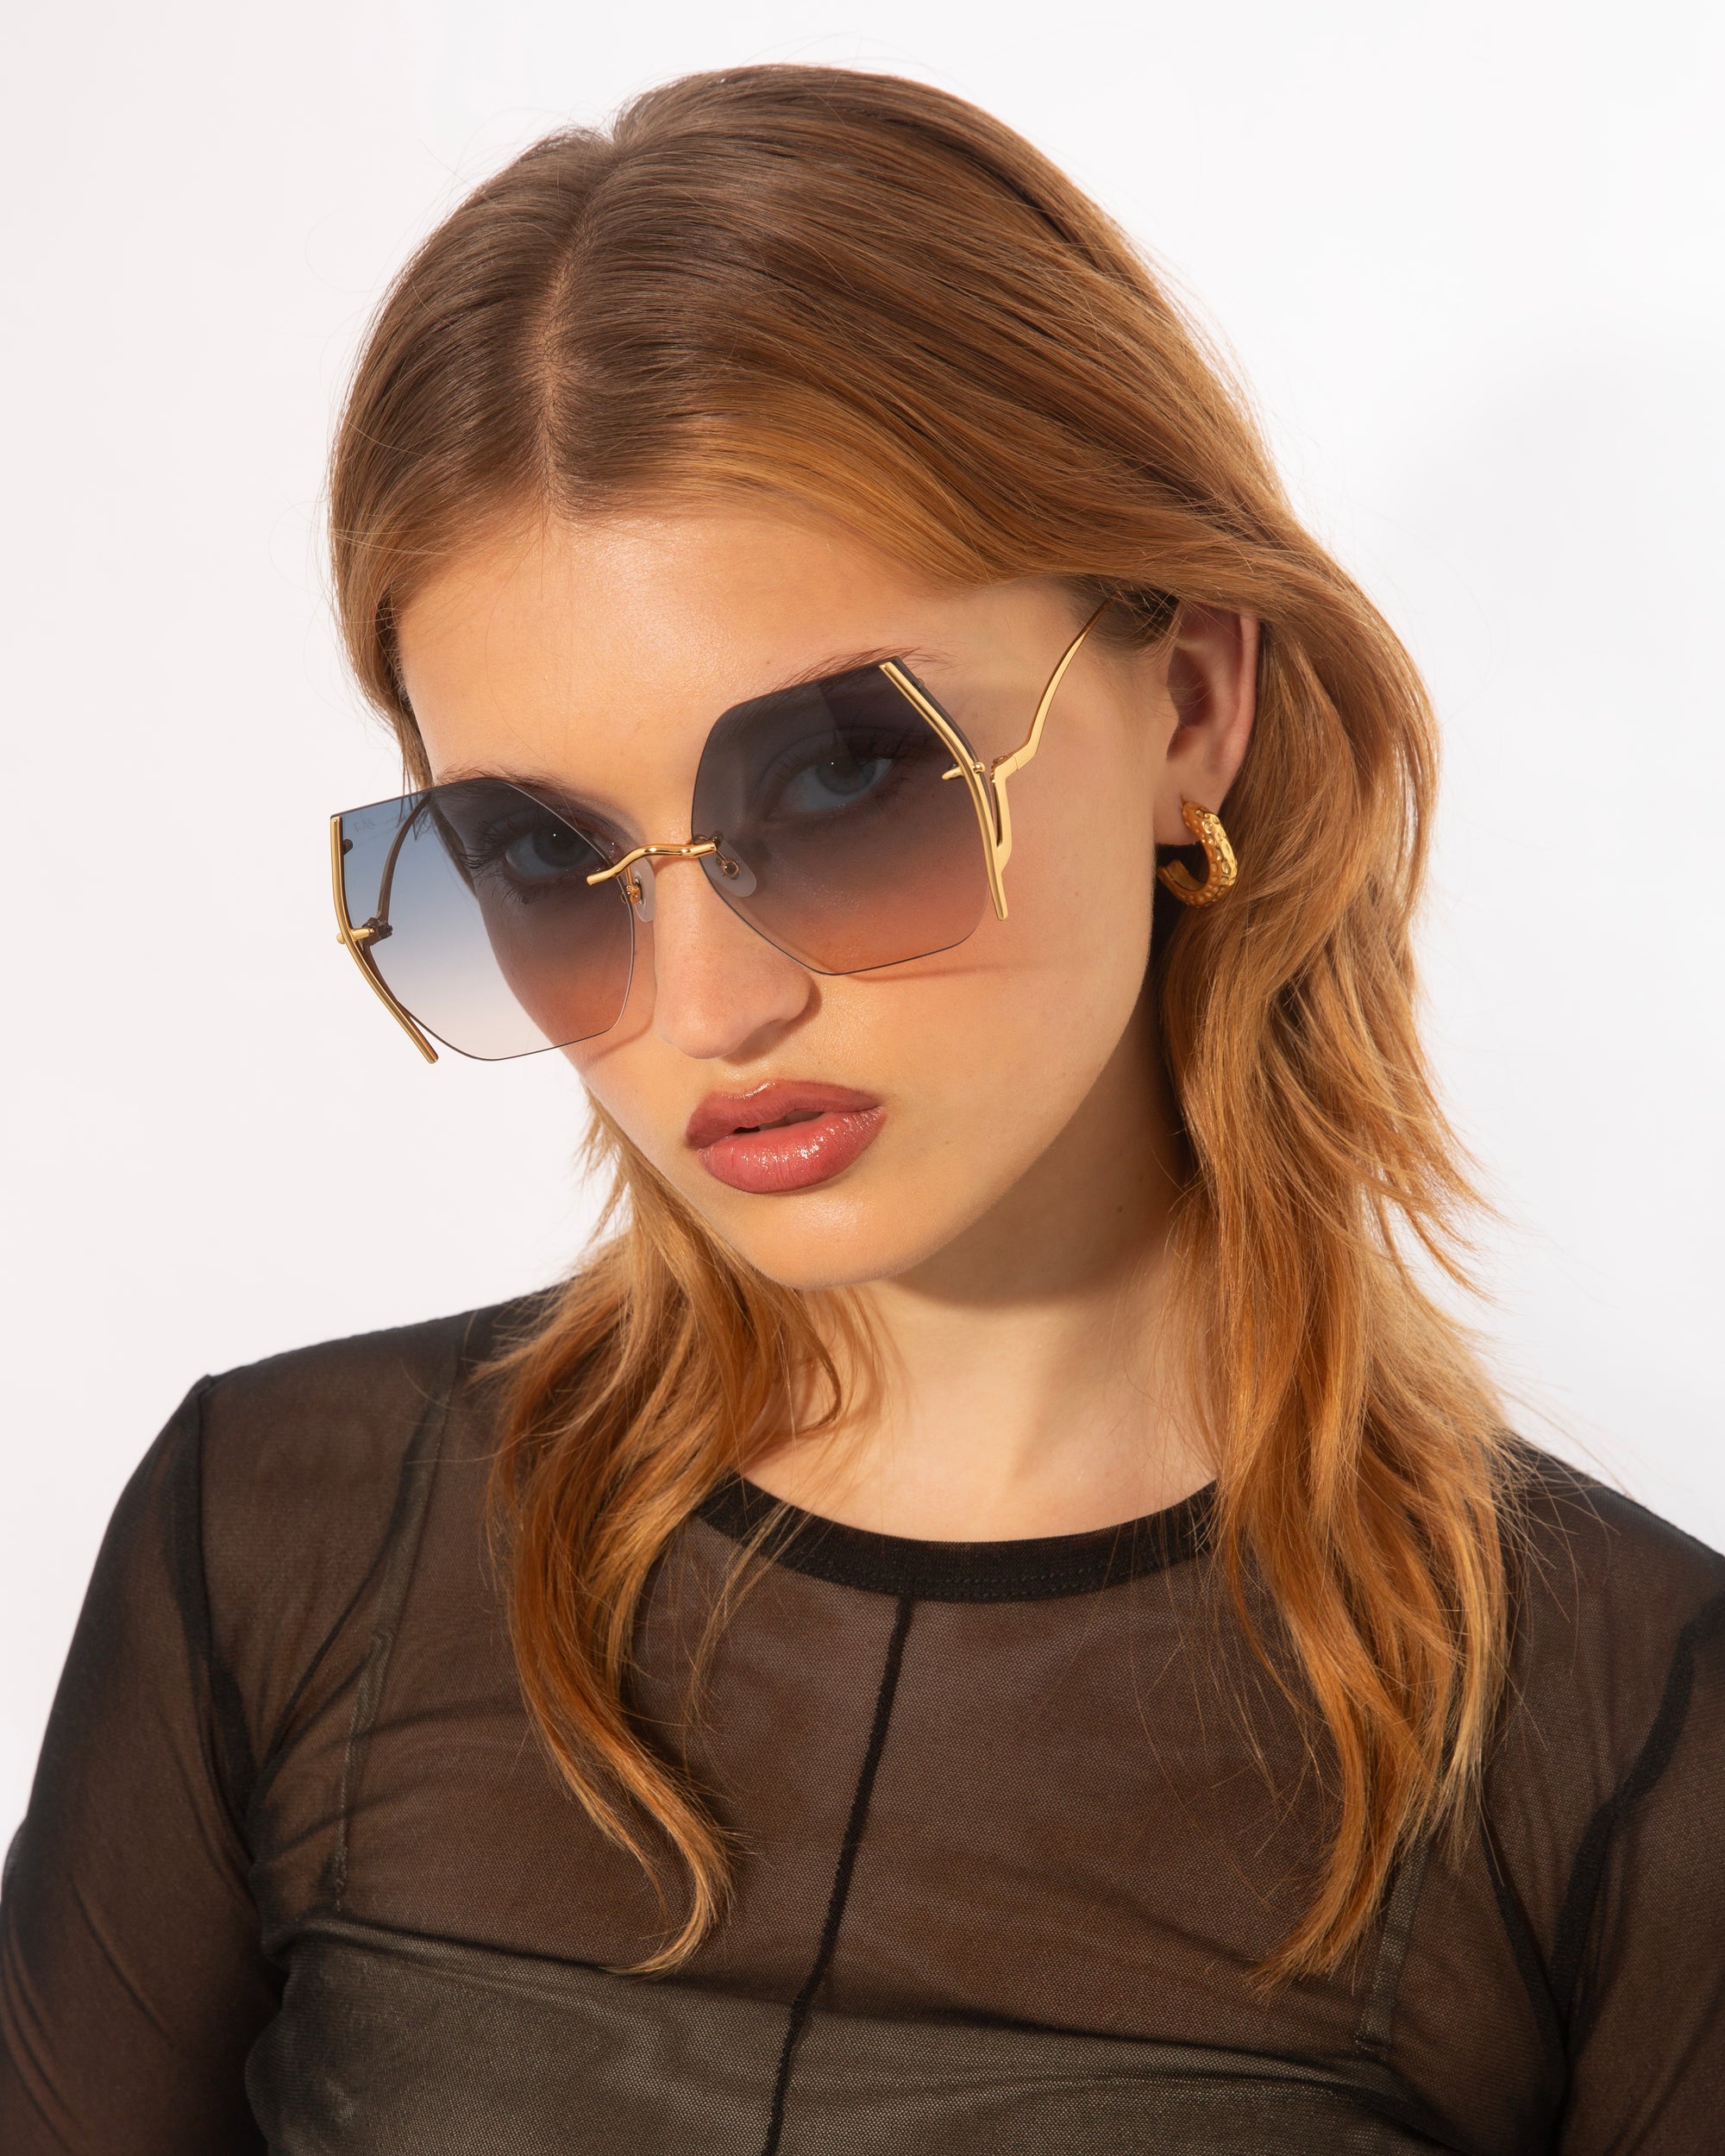 A woman with straight, auburn hair wears oversized, geometric sunglasses named Generation by For Art's Sake®, featuring gradient lenses and gold-plated stainless steel frames with jadestone nosepads for added comfort and UV protection. She has gold hoop earrings and is dressed in a black, sheer long-sleeve top. The background is plain white.